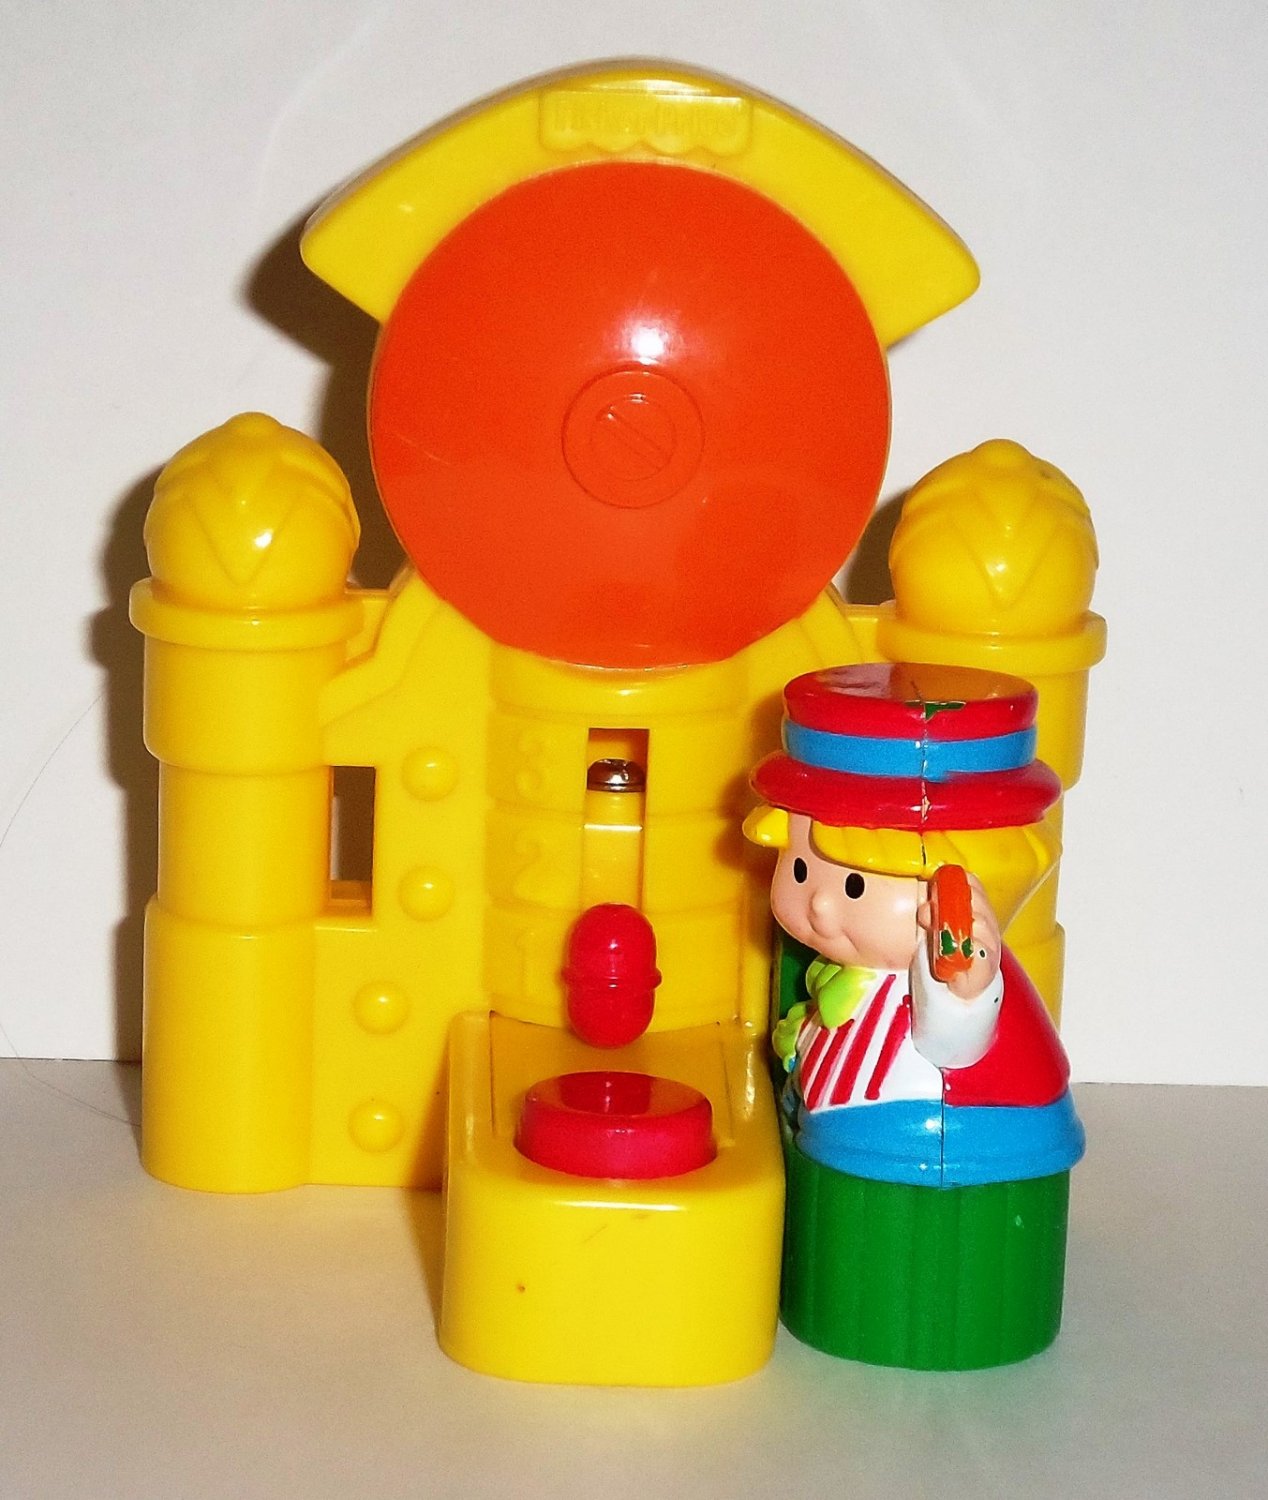 Details about   2003-2004 Fisher Price McDonalds Happy Meal Under 3 Toy Carnival Bell 